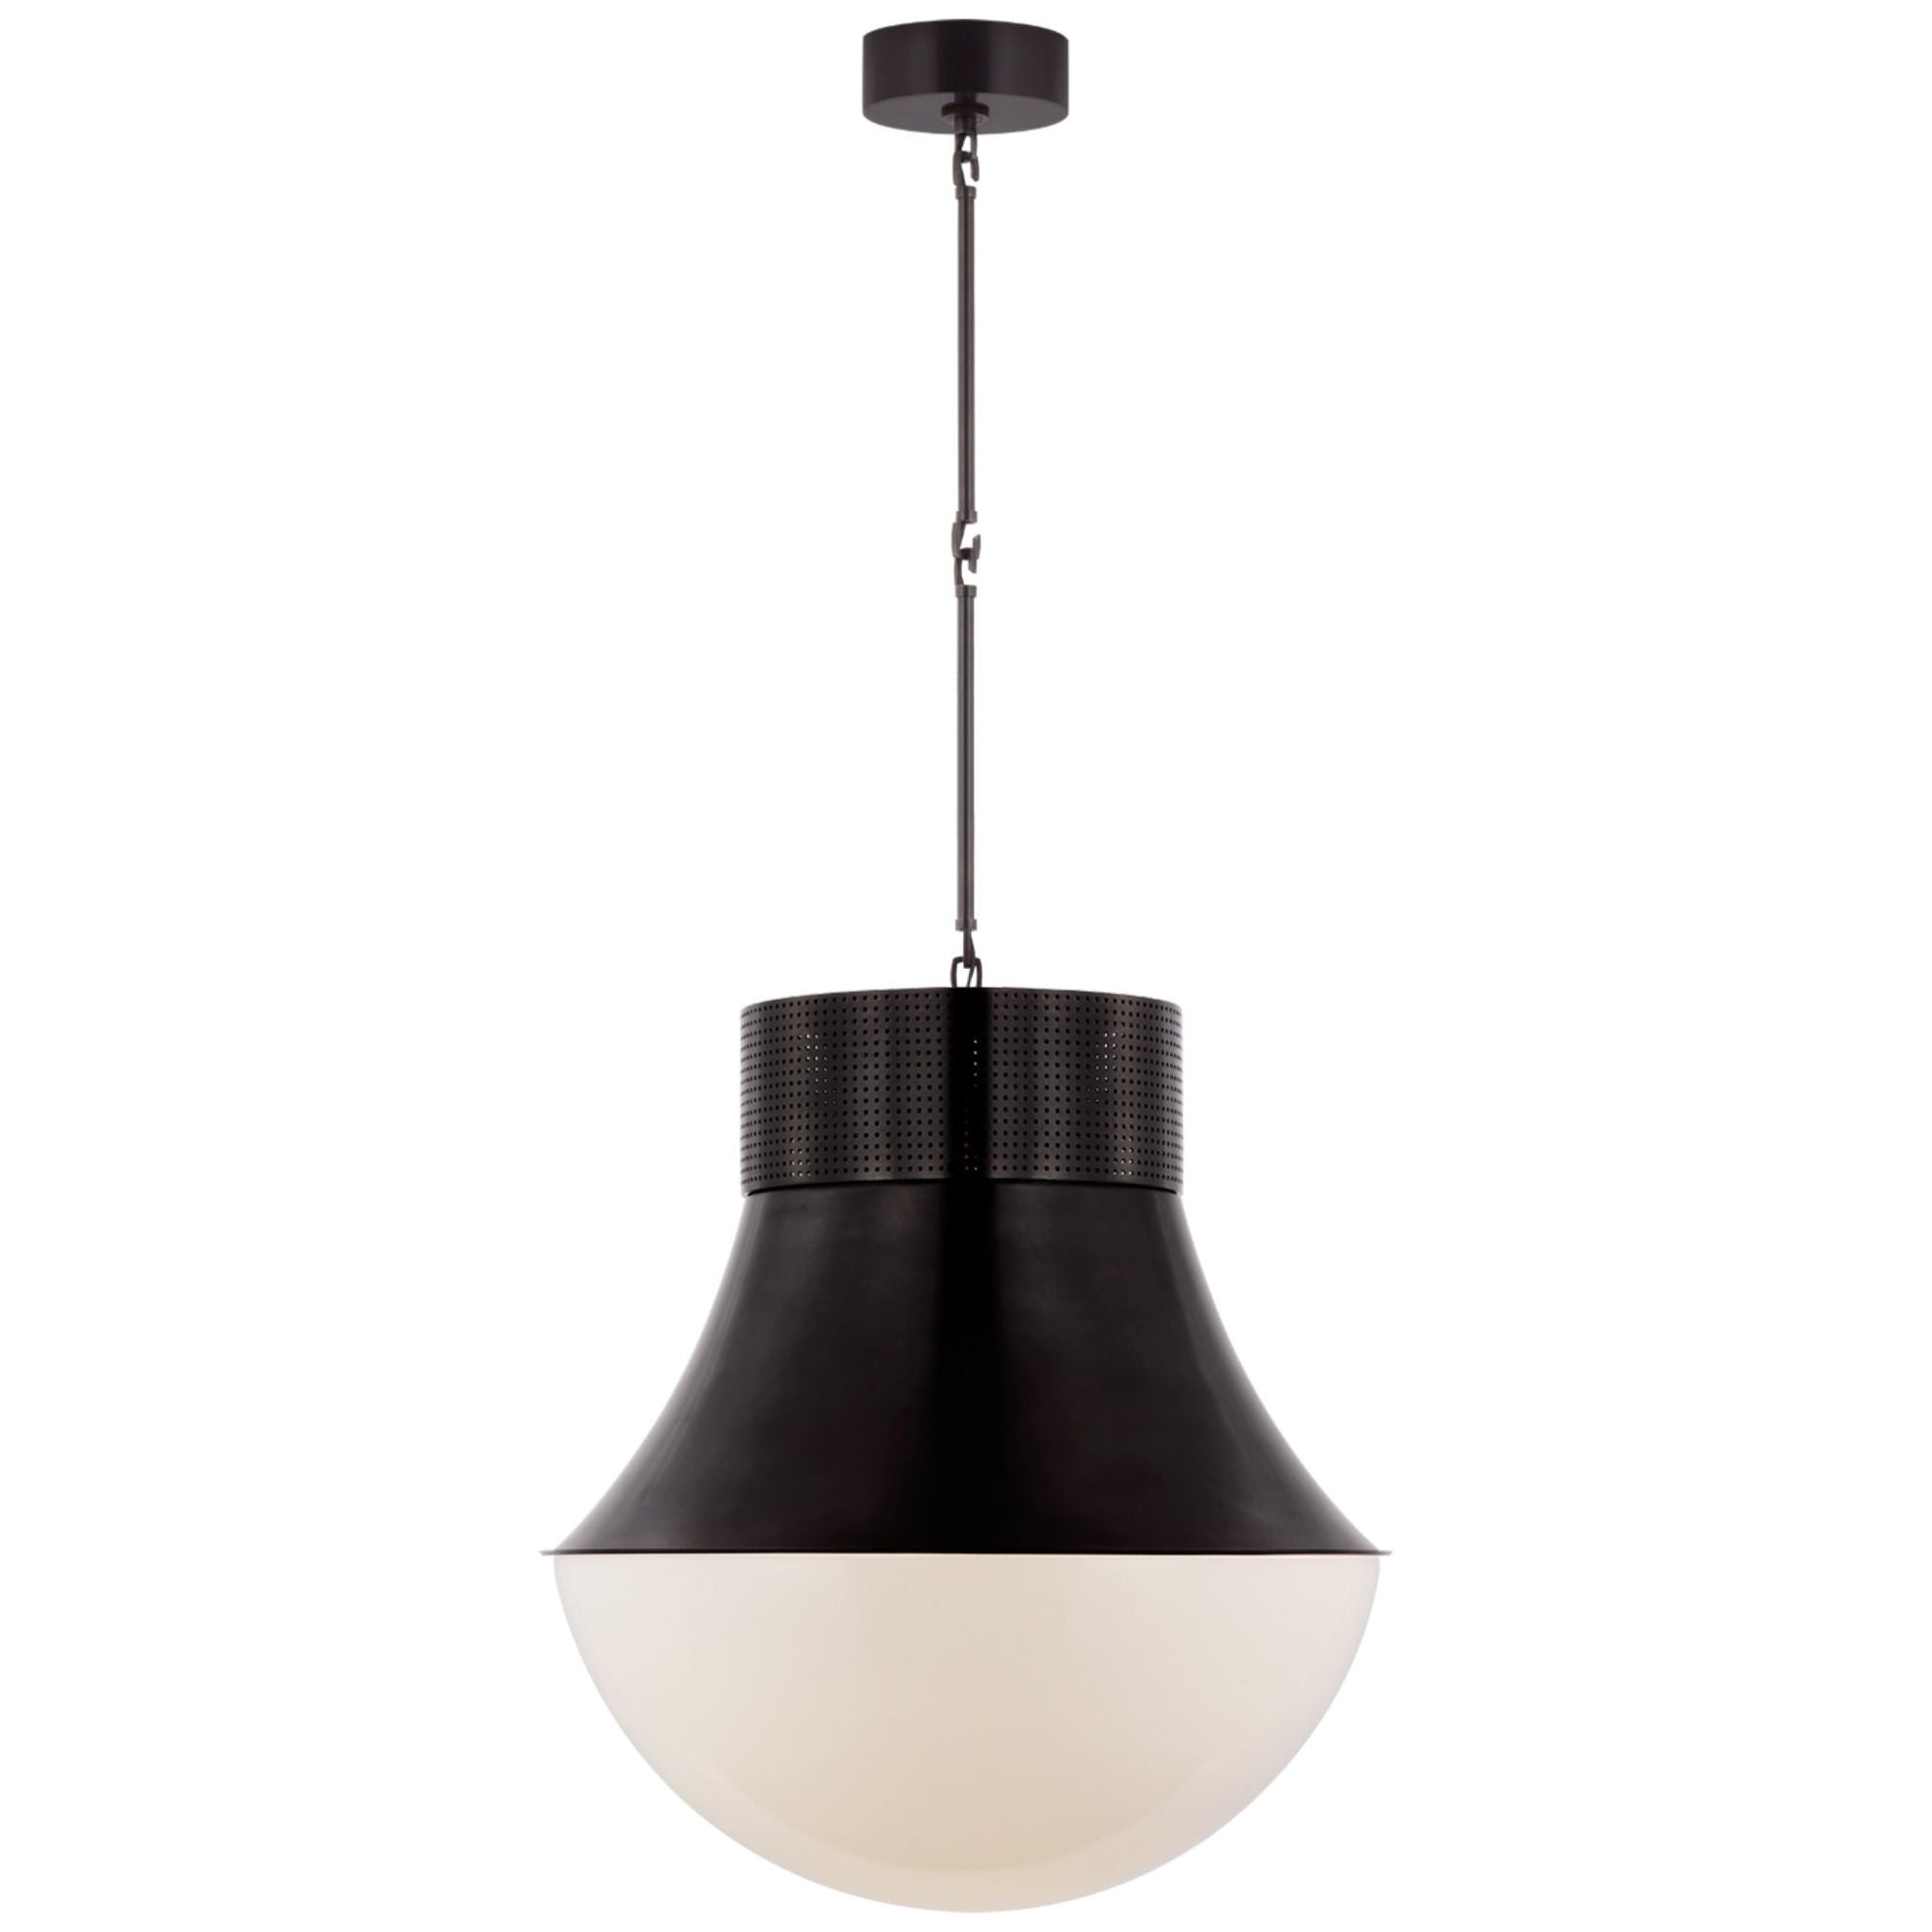 Kelly Wearstler Precision 24" Pendant in Bronze with White Glass